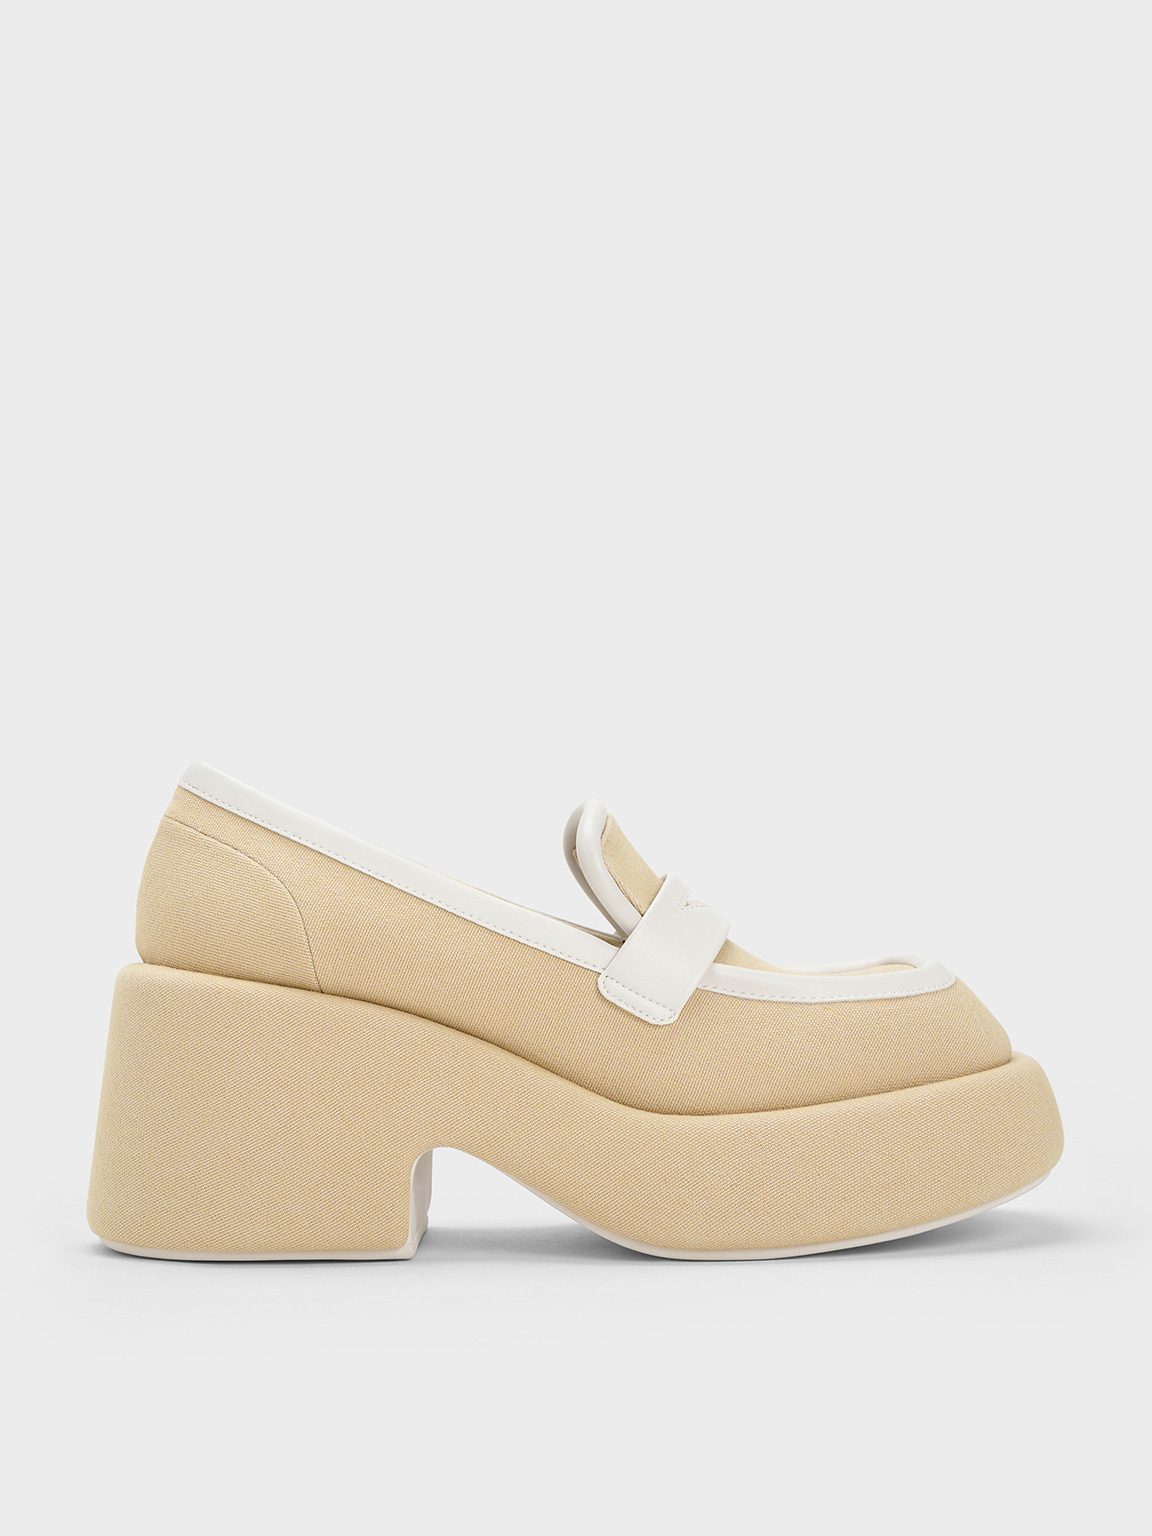 Charles & Keith Leni Canvas Platform Loafers In Beige